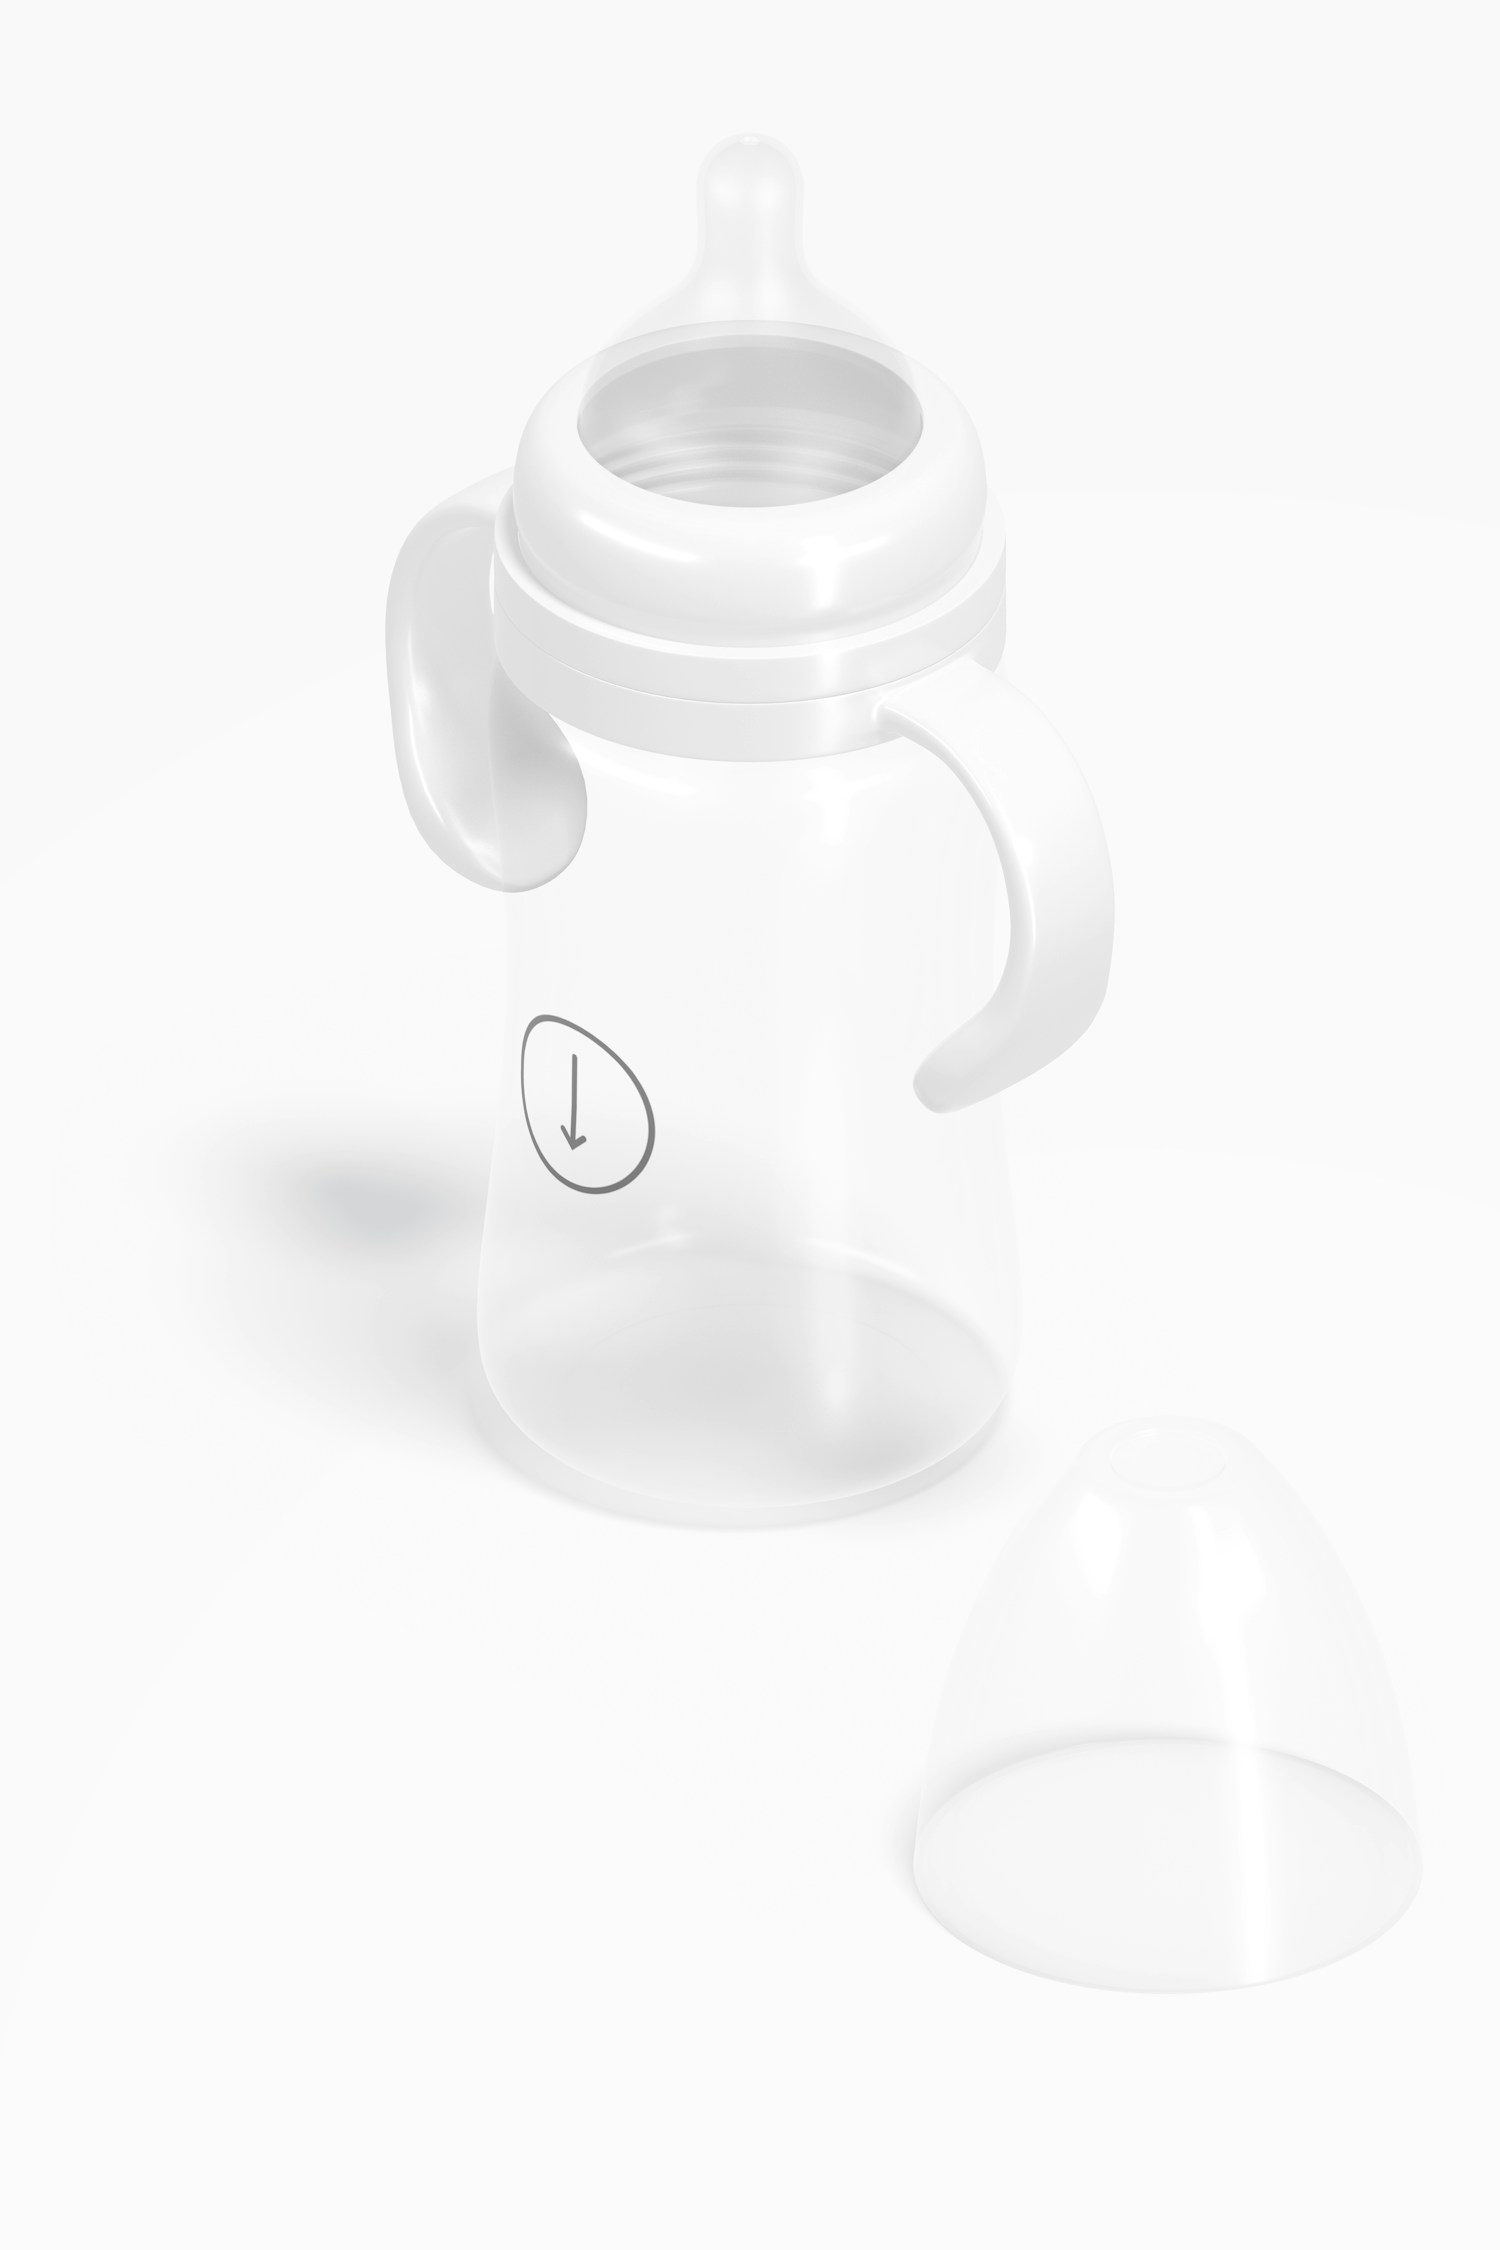 300 ml Baby Milk Bottle without Cap Mockup, Isometric View